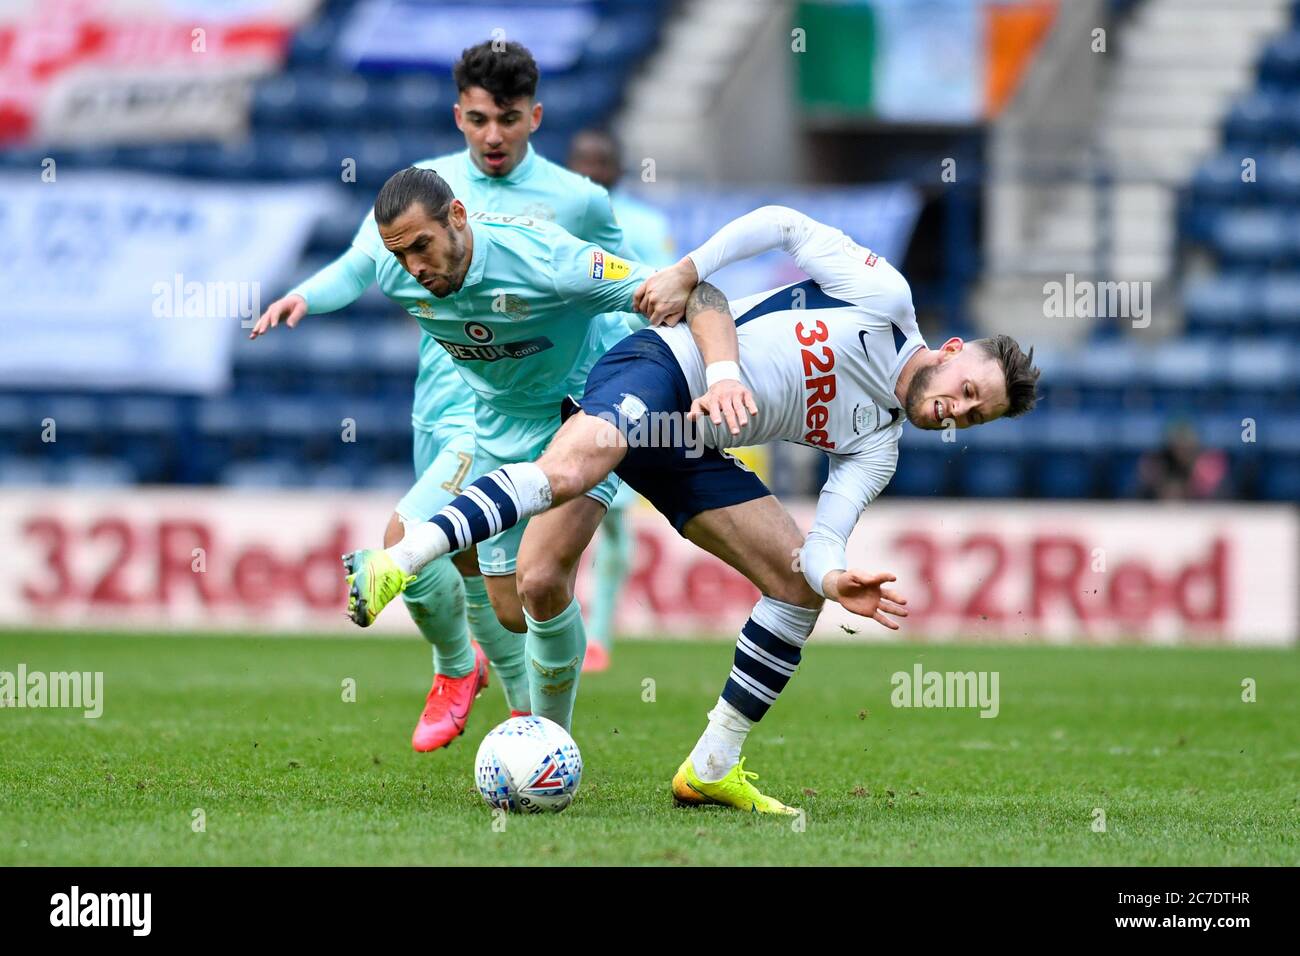 7th March 2020, Deepdale, Preston, England; Sky Bet Championship, Preston North End v Queens Park Rangers : Geoff Cameron (5) of Queens Park Rangers fouls Alan Browne (8) of Preston North End in his attempt to get the ball Stock Photo